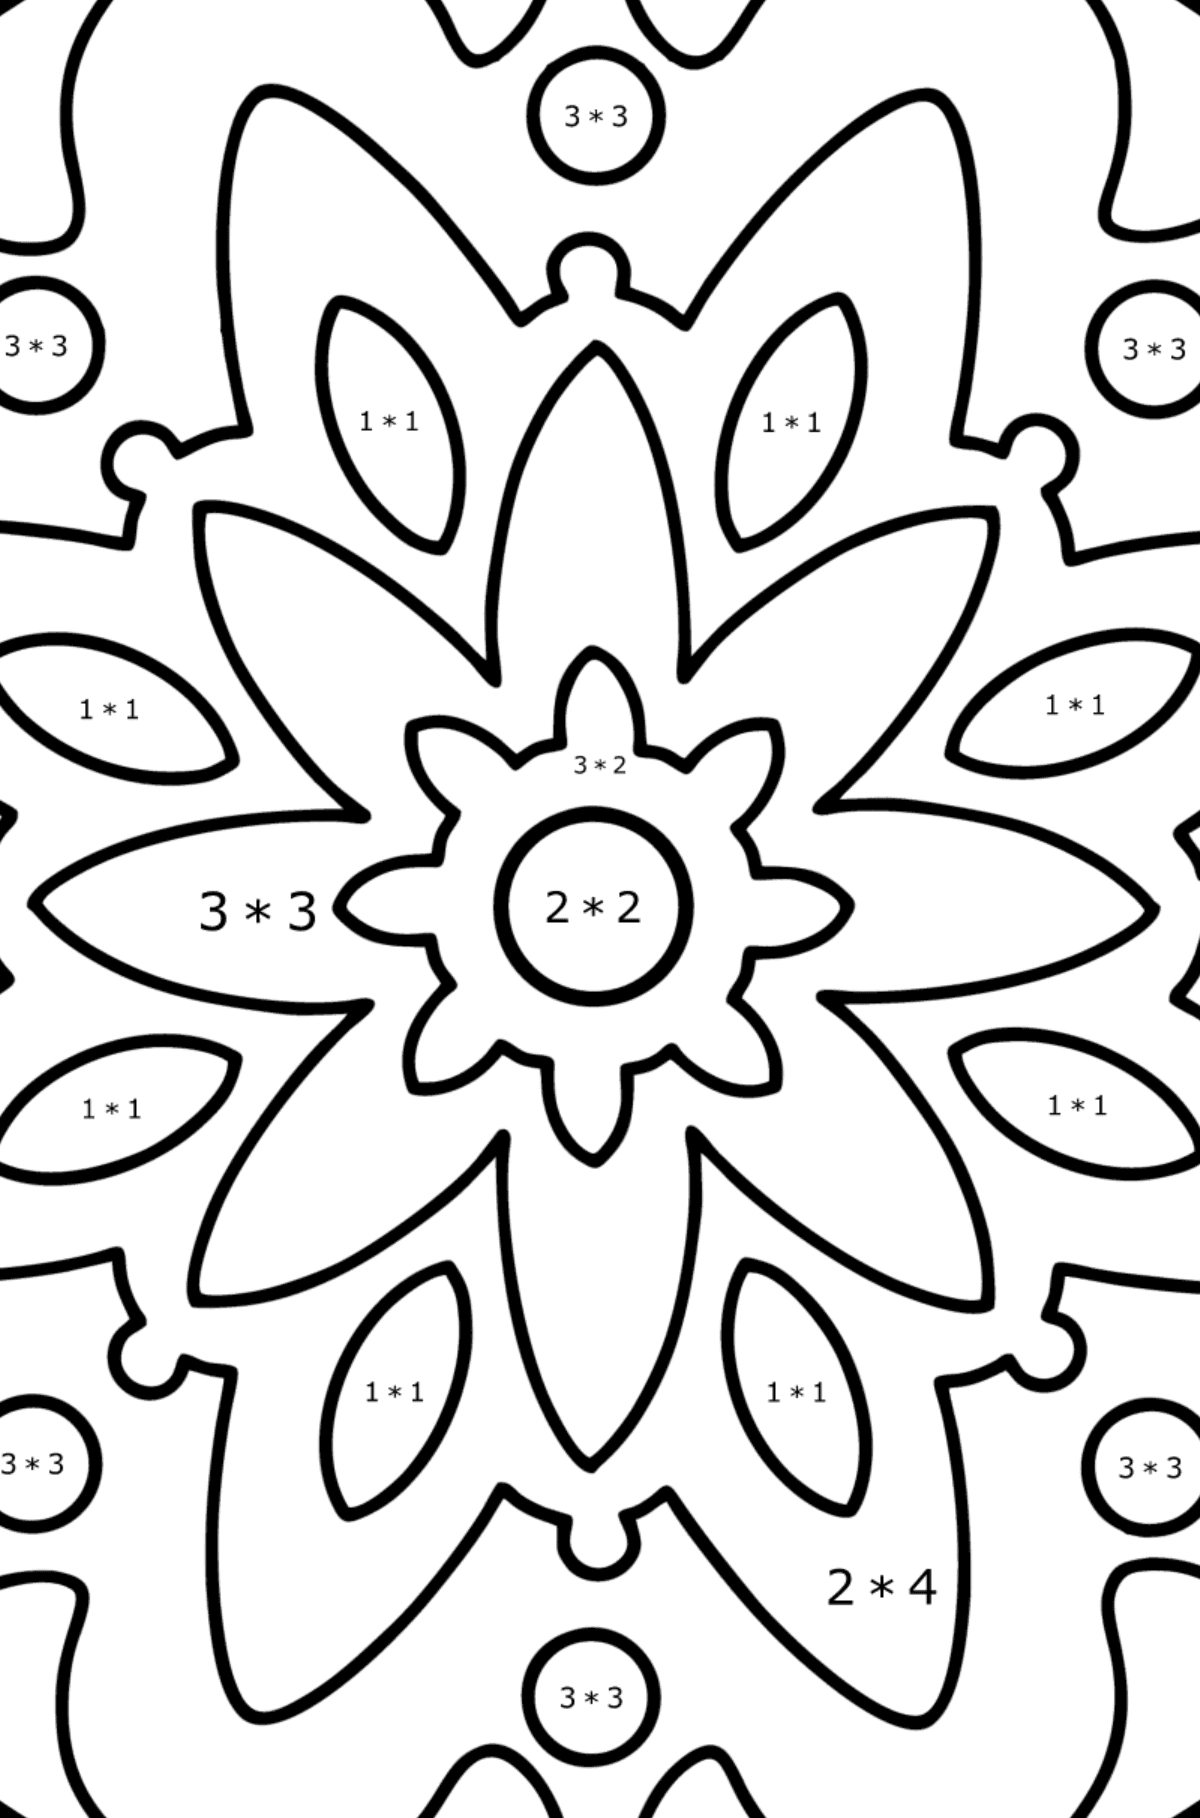 Mandala coloring page - 22 elements - Math Coloring - Multiplication for Kids